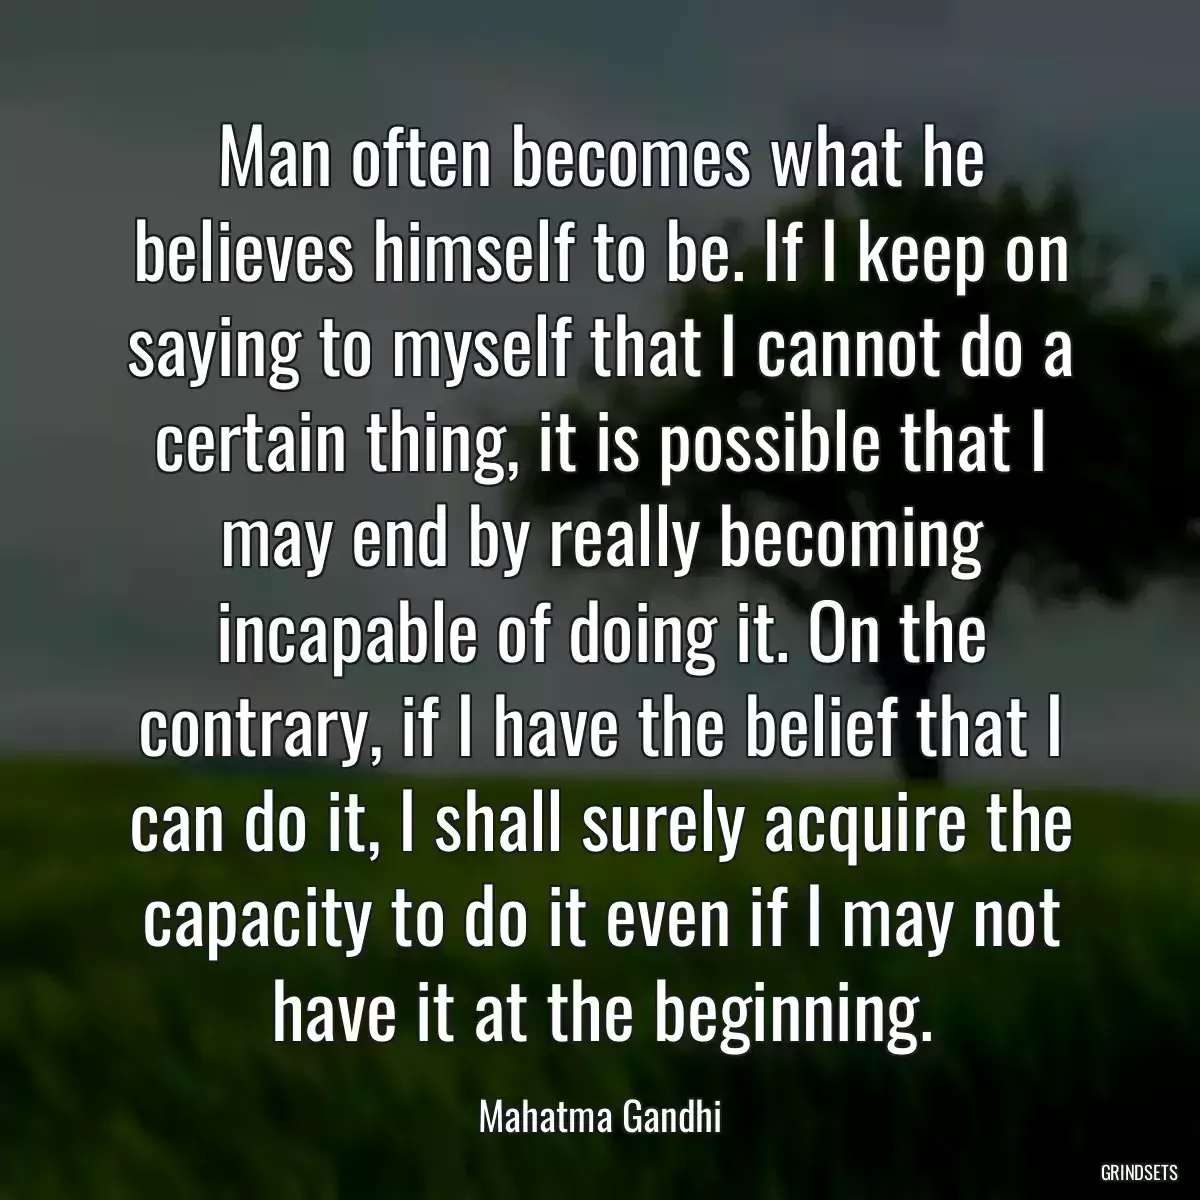 Man often becomes what he believes himself to be. If I keep on saying to myself that I cannot do a certain thing, it is possible that I may end by really becoming incapable of doing it. On the contrary, if I have the belief that I can do it, I shall surely acquire the capacity to do it even if I may not have it at the beginning.